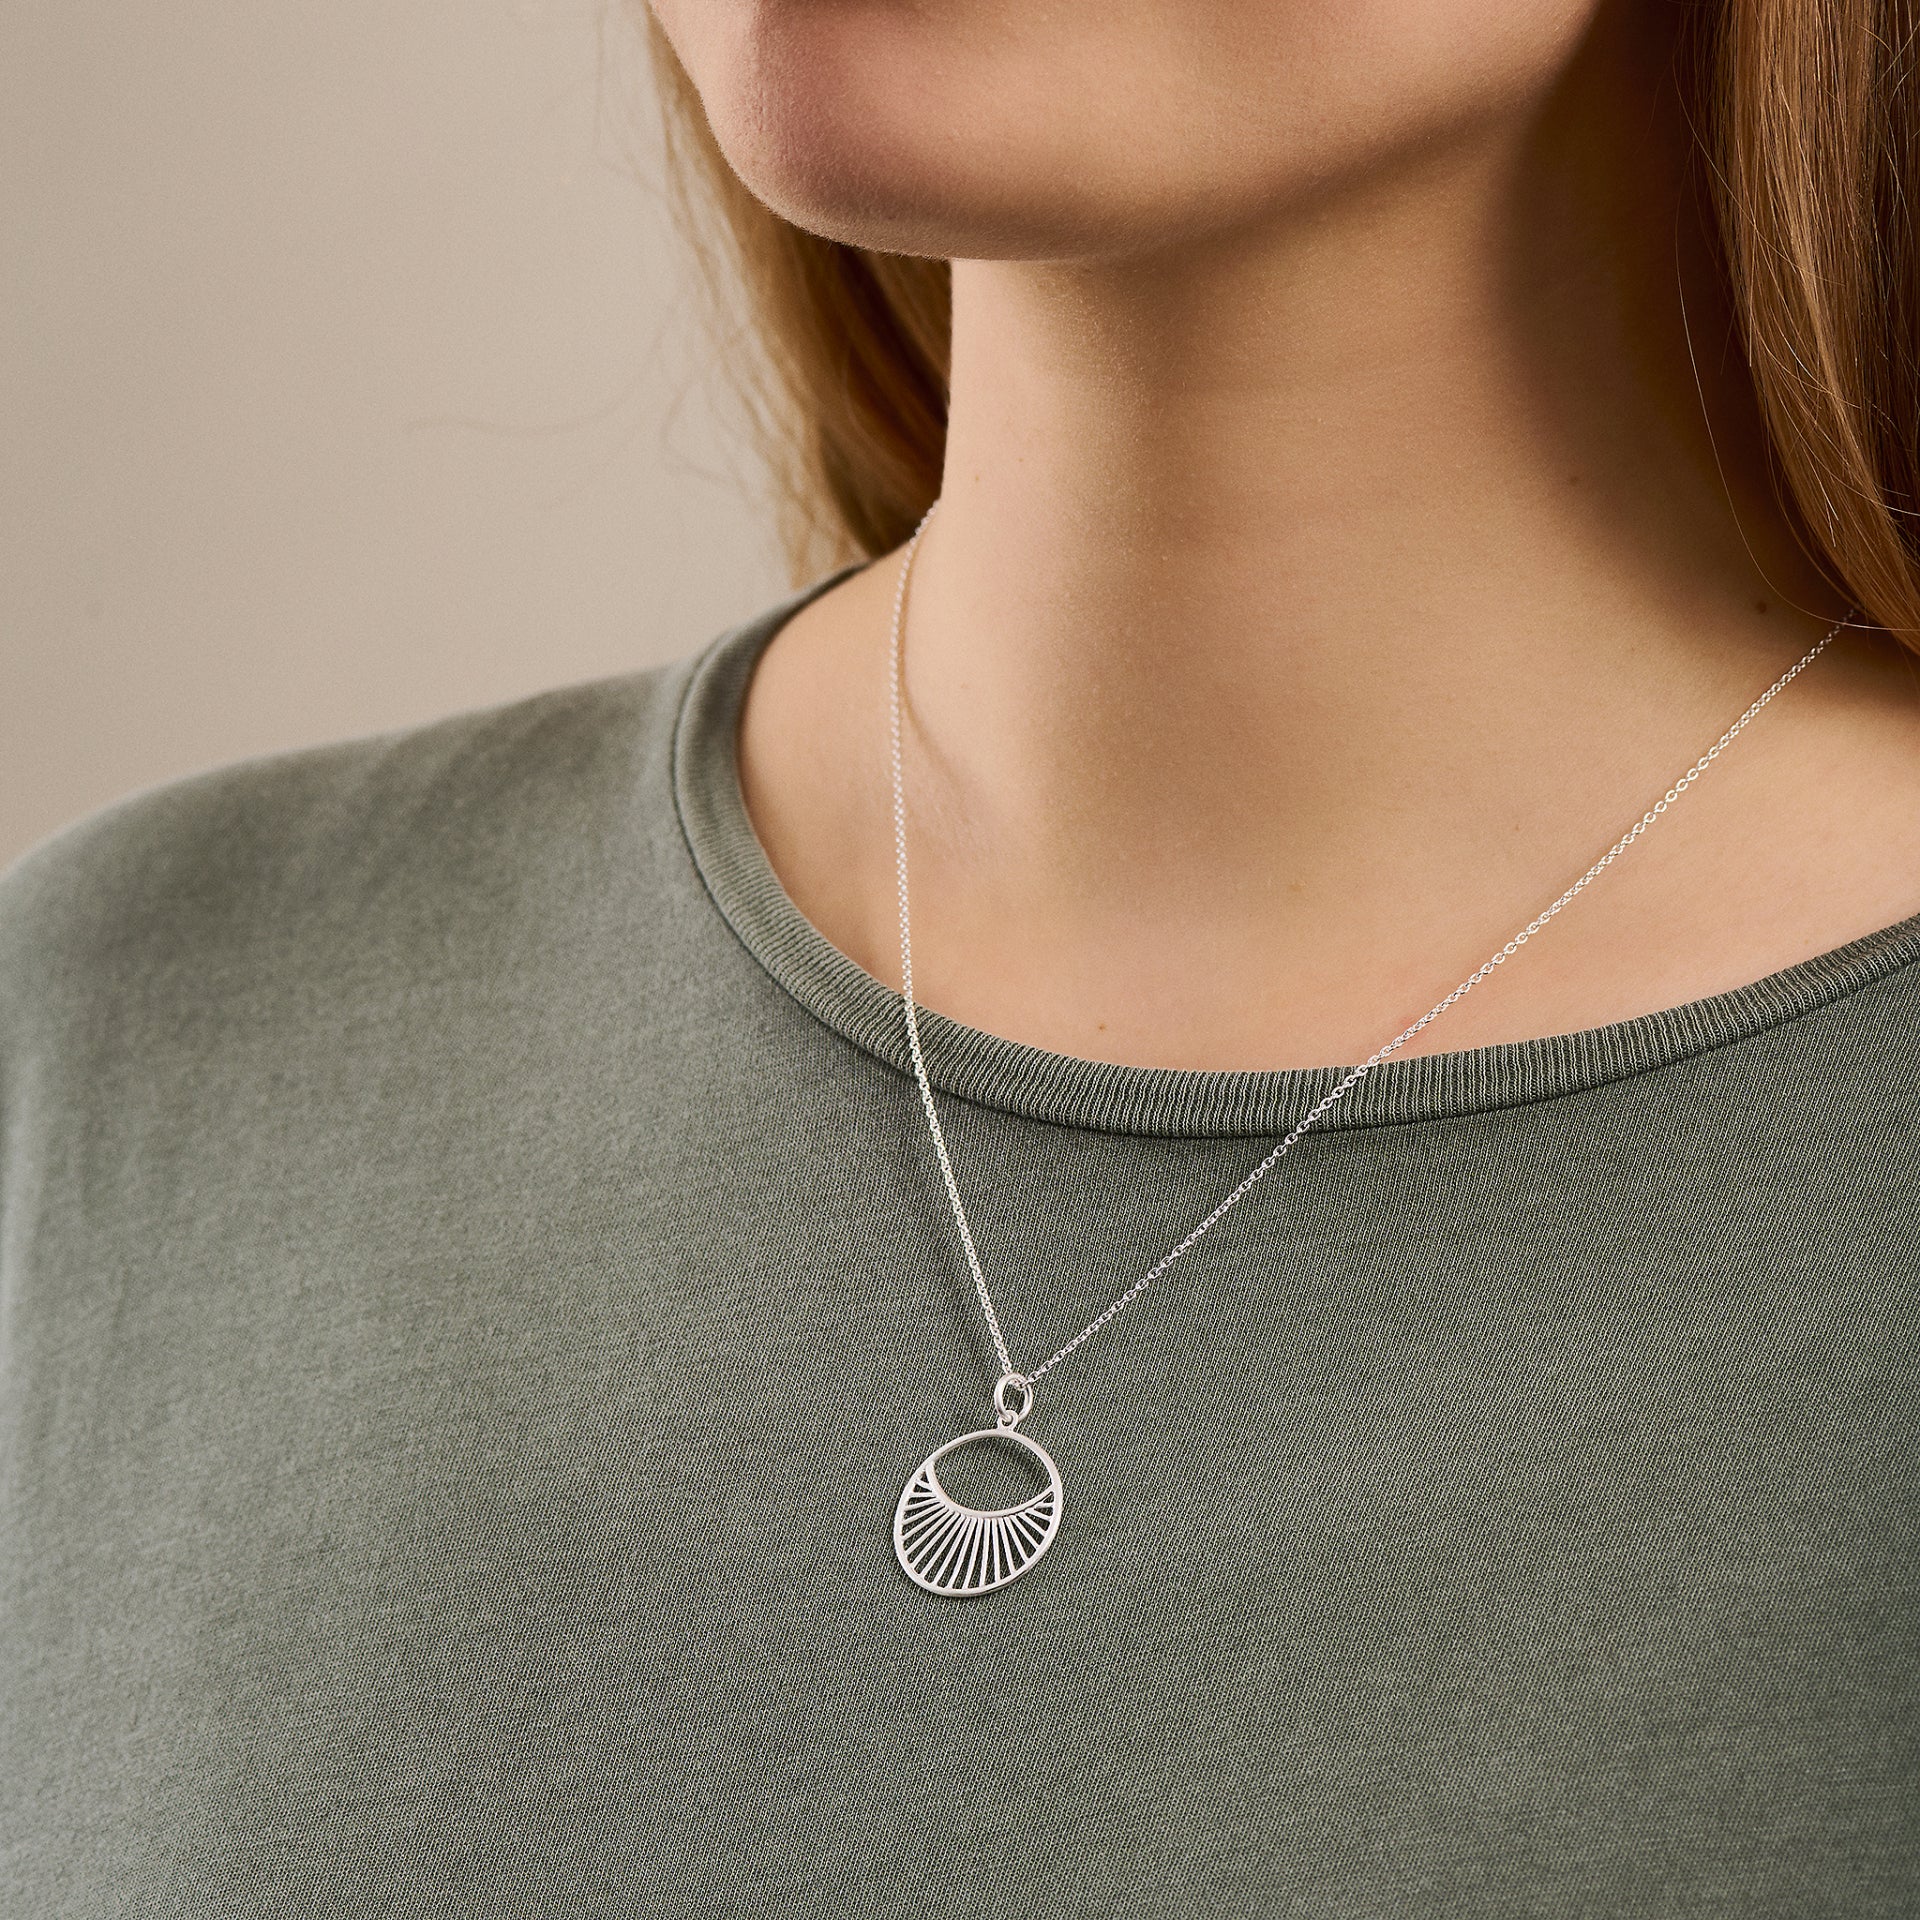 Daylight Necklace in Silver, Short